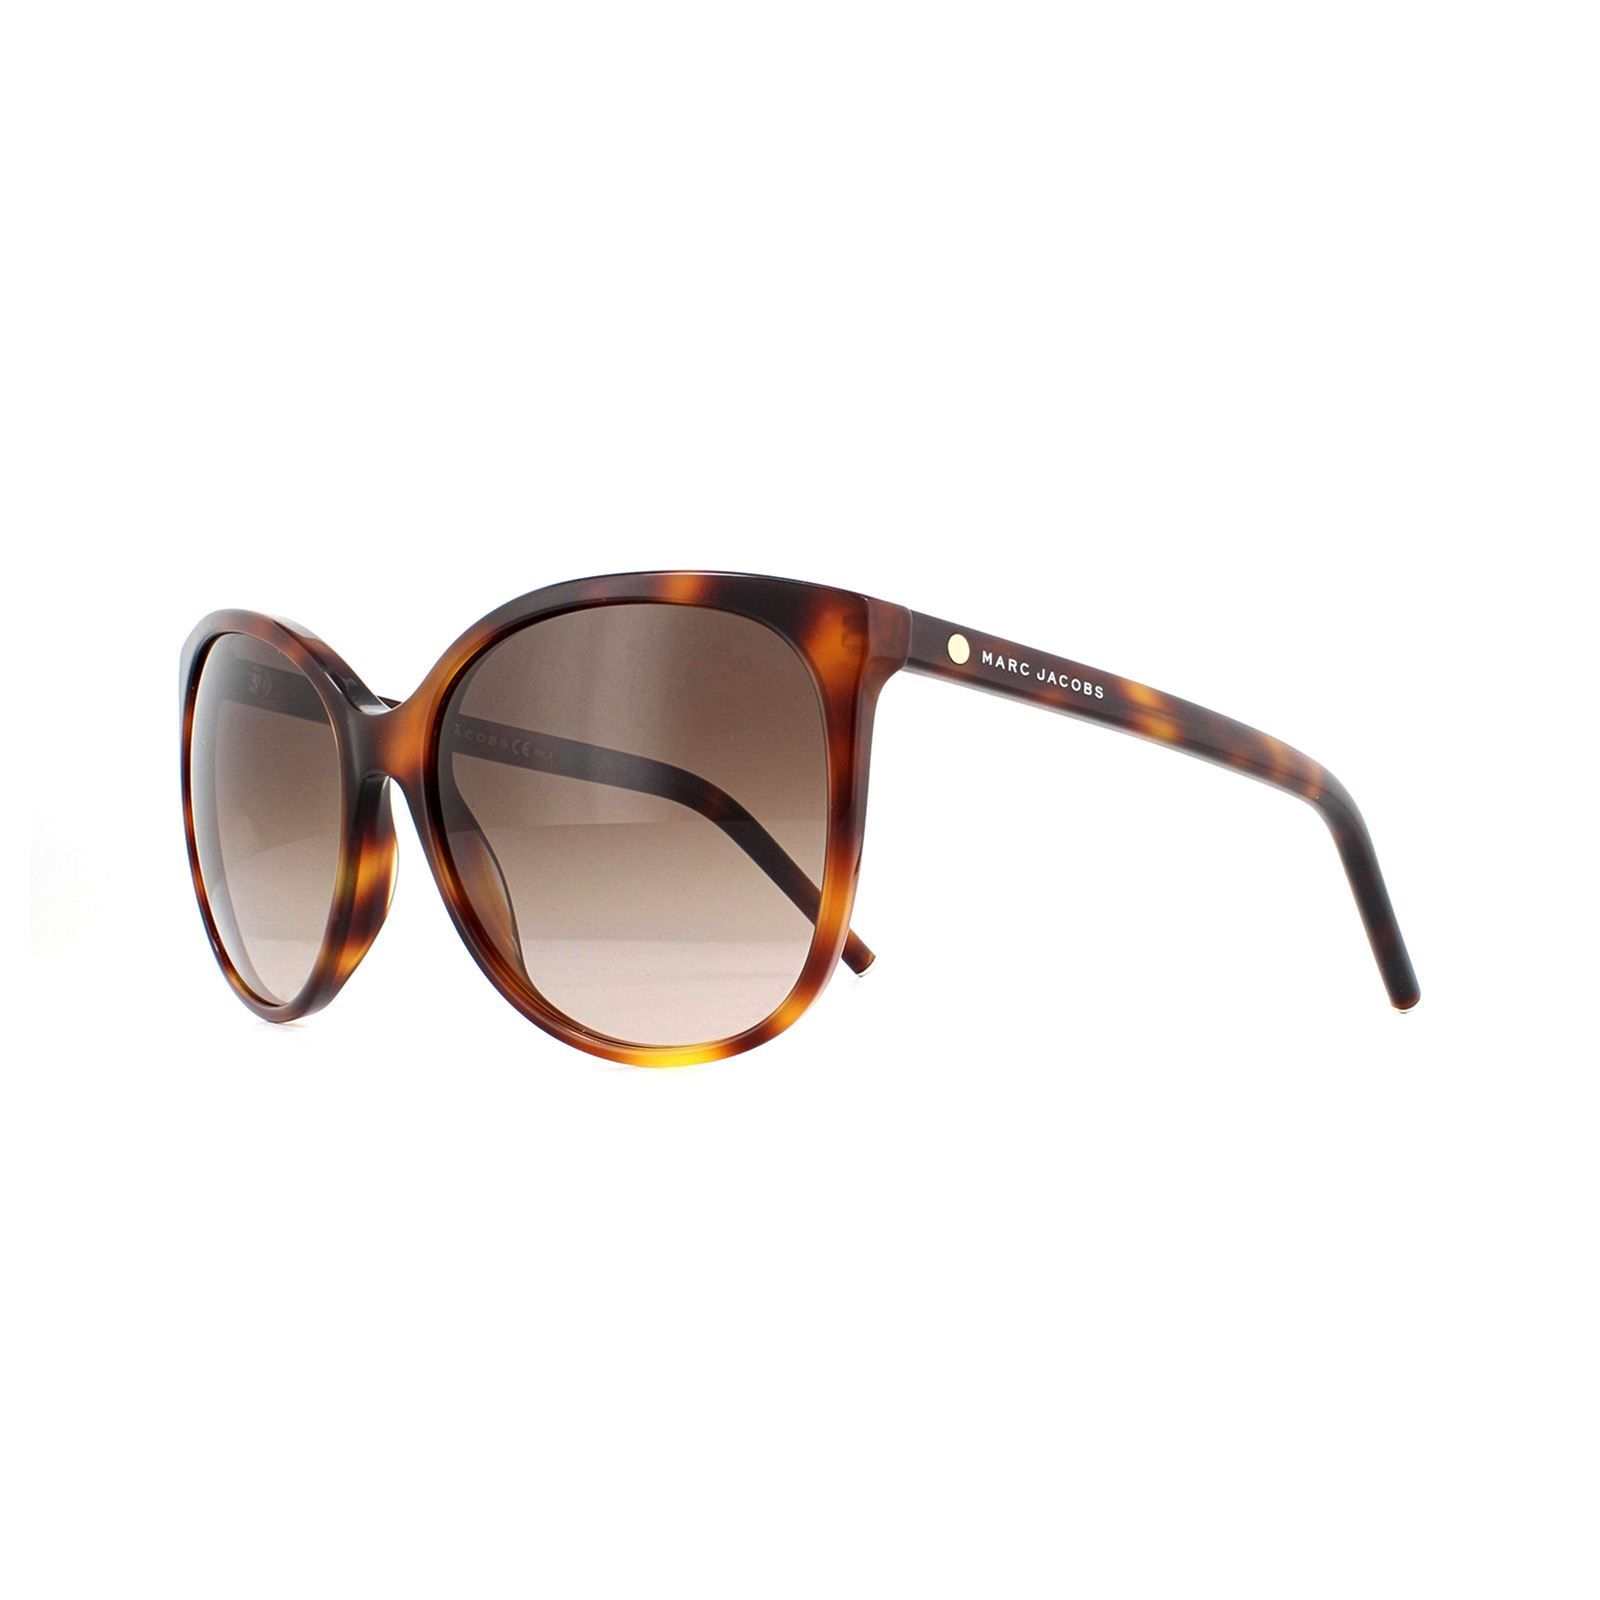 Marc Jacobs Sunglasses MARC 79/S 05L J6 Havana Brown Gradient are from the master of design Marc Jacobs who always brings a unique design ethos that is reflected well in the sunglasses collection. These trendy round shaped frames made of plastic are perfect for the modern fashionable woman.